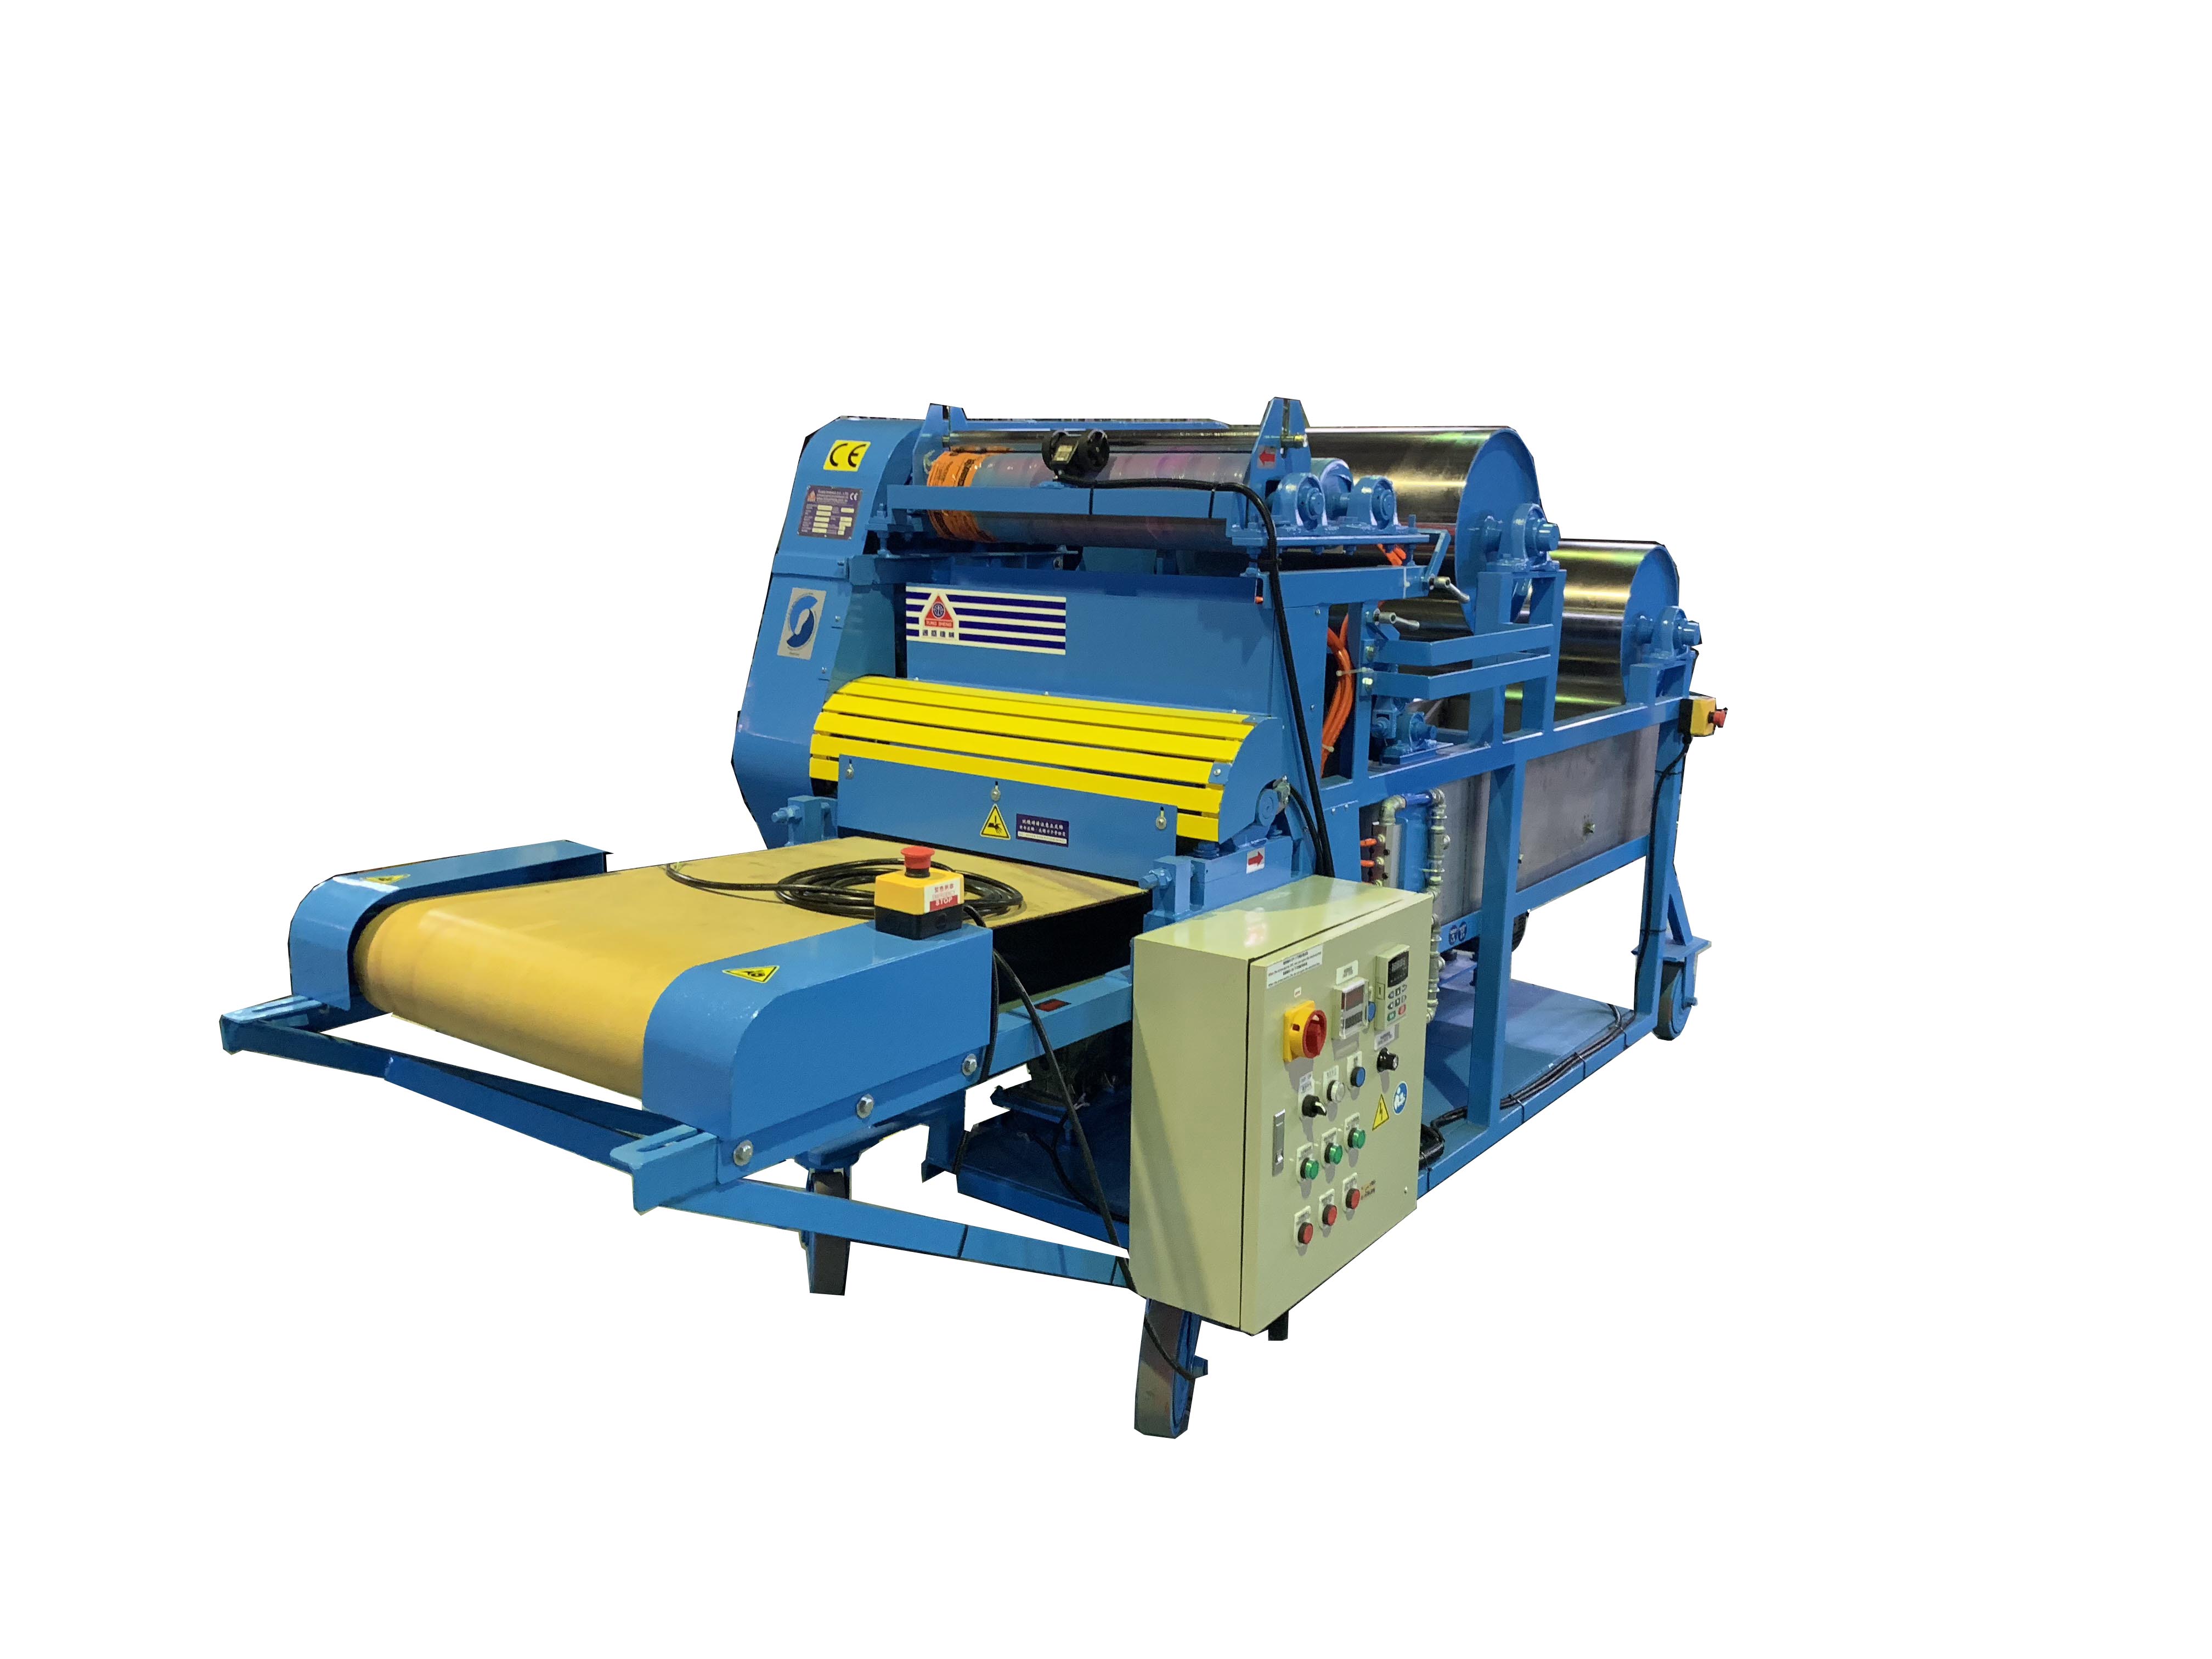 Automatic Cutting Machine (With 2 Cooling Rollers, 1 Cooling Tank, 1 Paste Tank, Precise Cutting, and Blowing System)